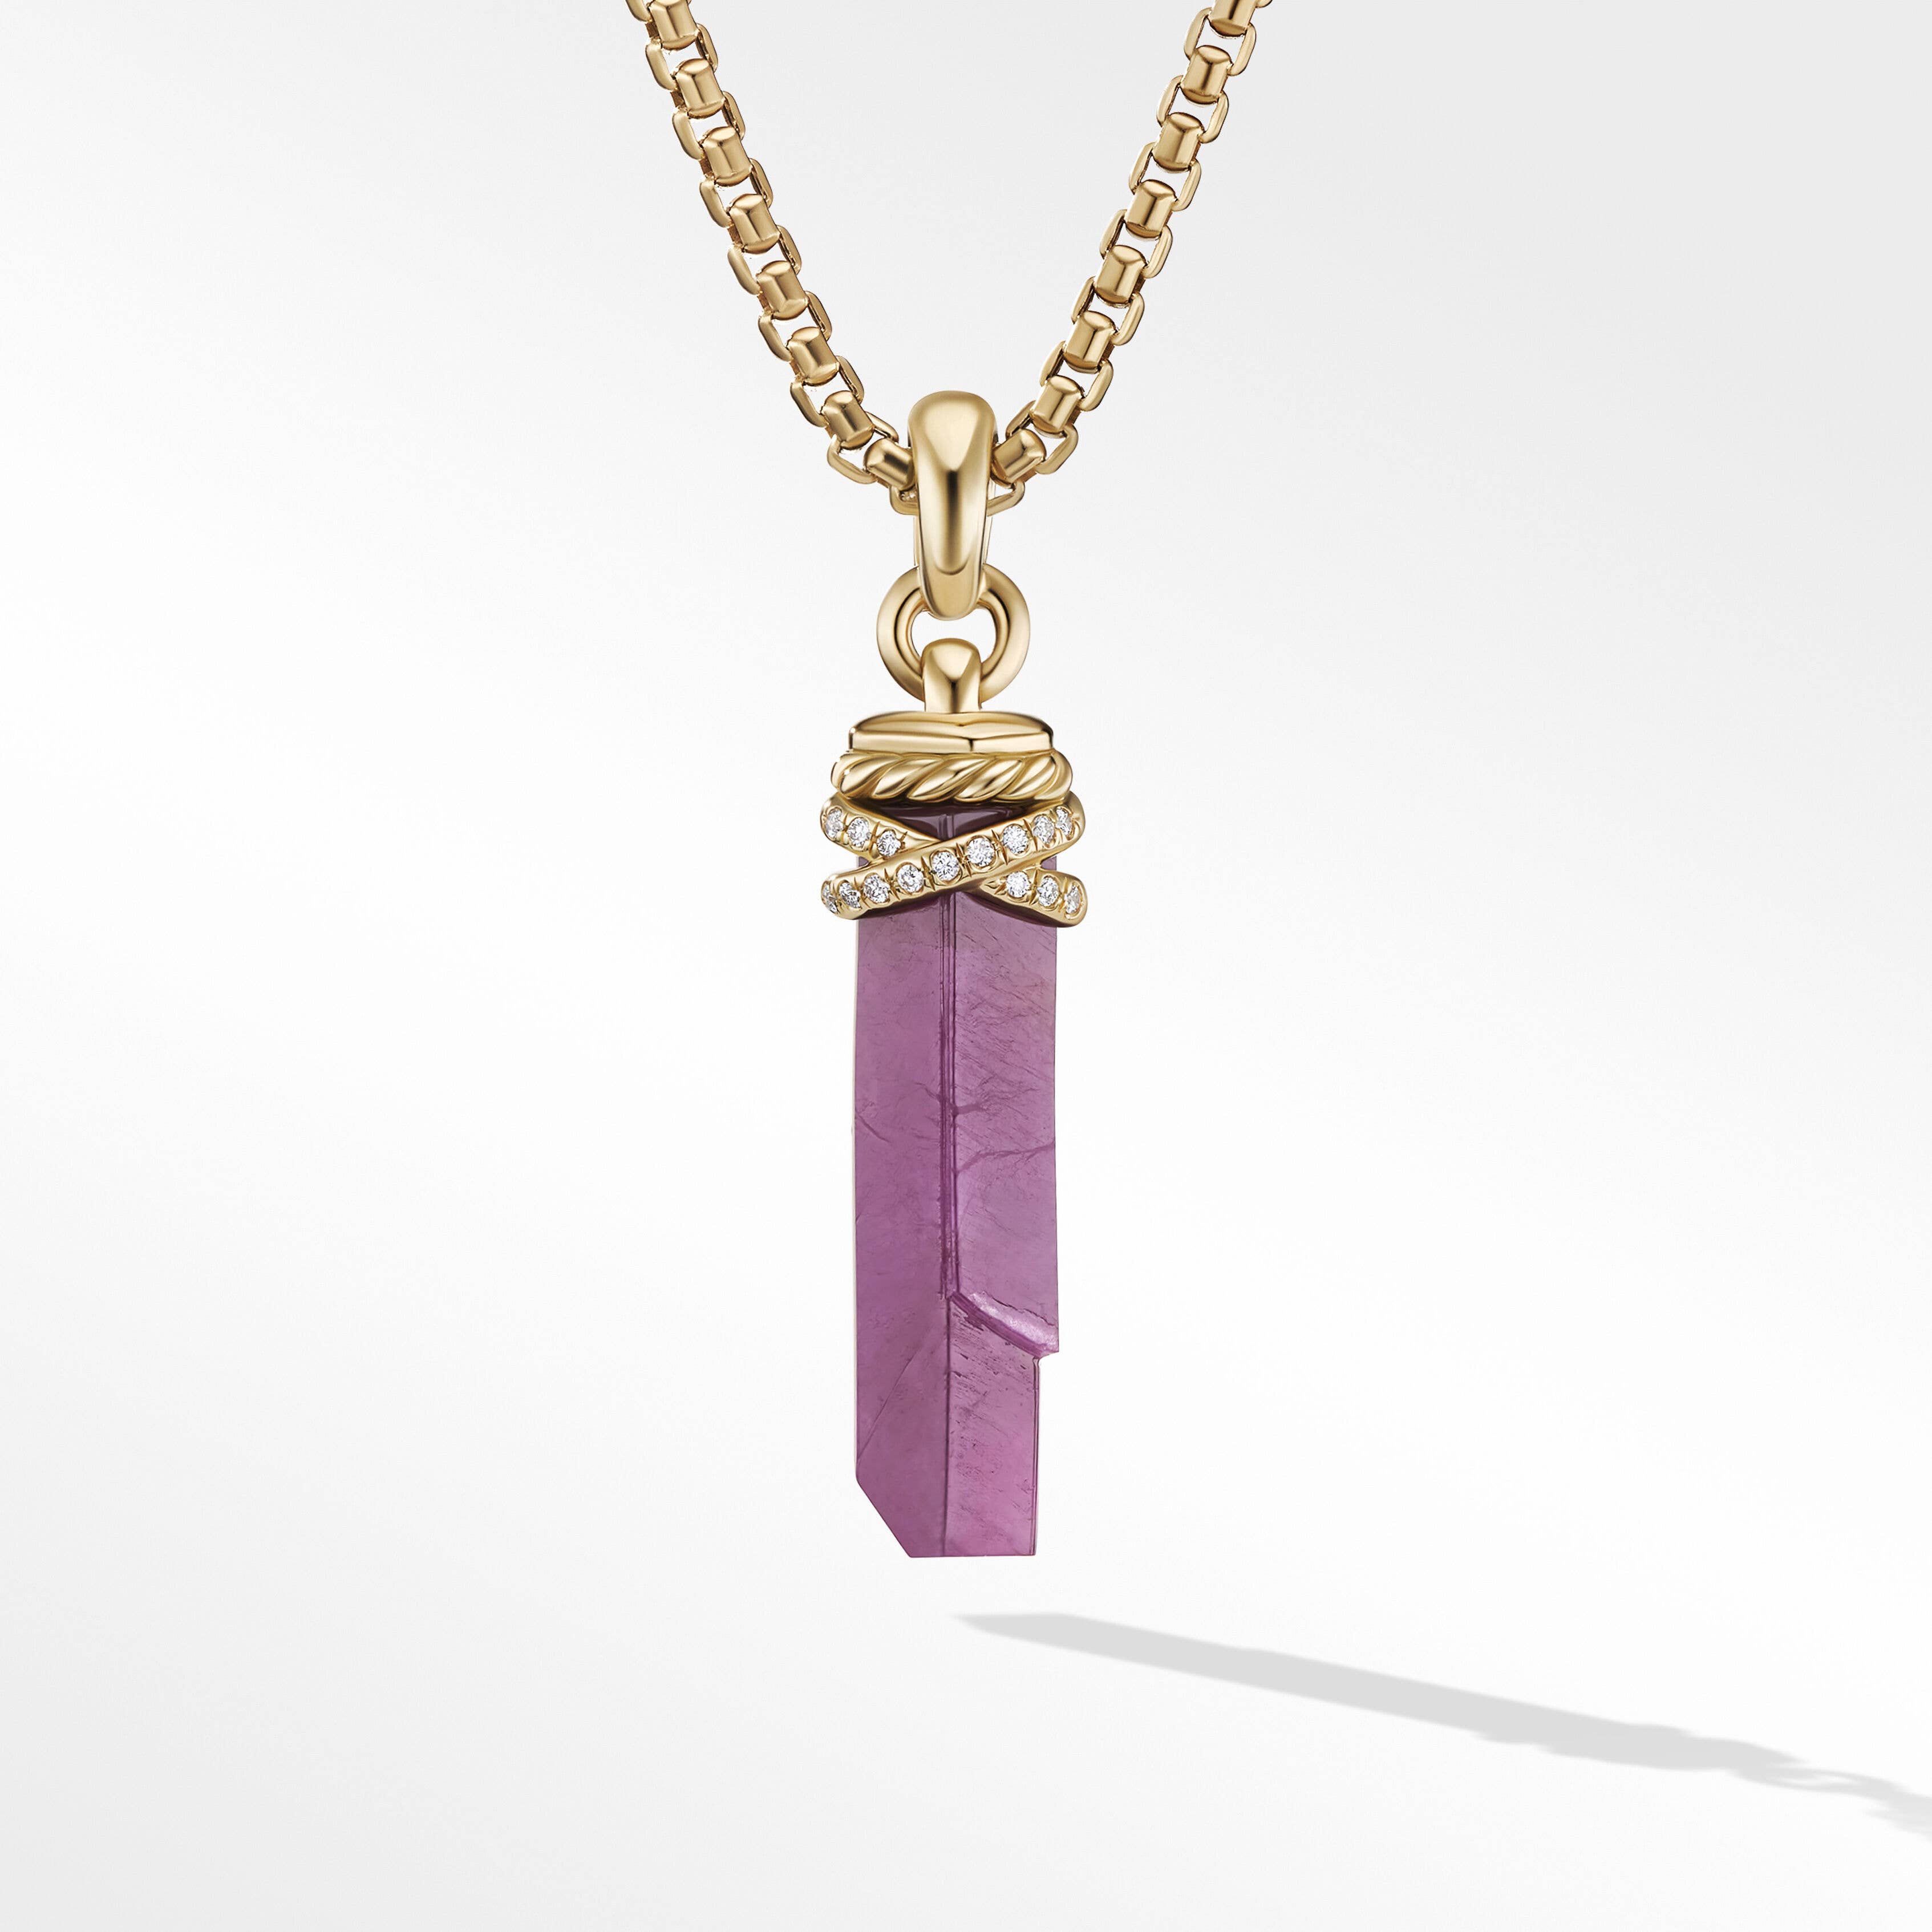 Wrapped Crystal Amulet with 18K Yellow Gold and Diamonds, 46mm